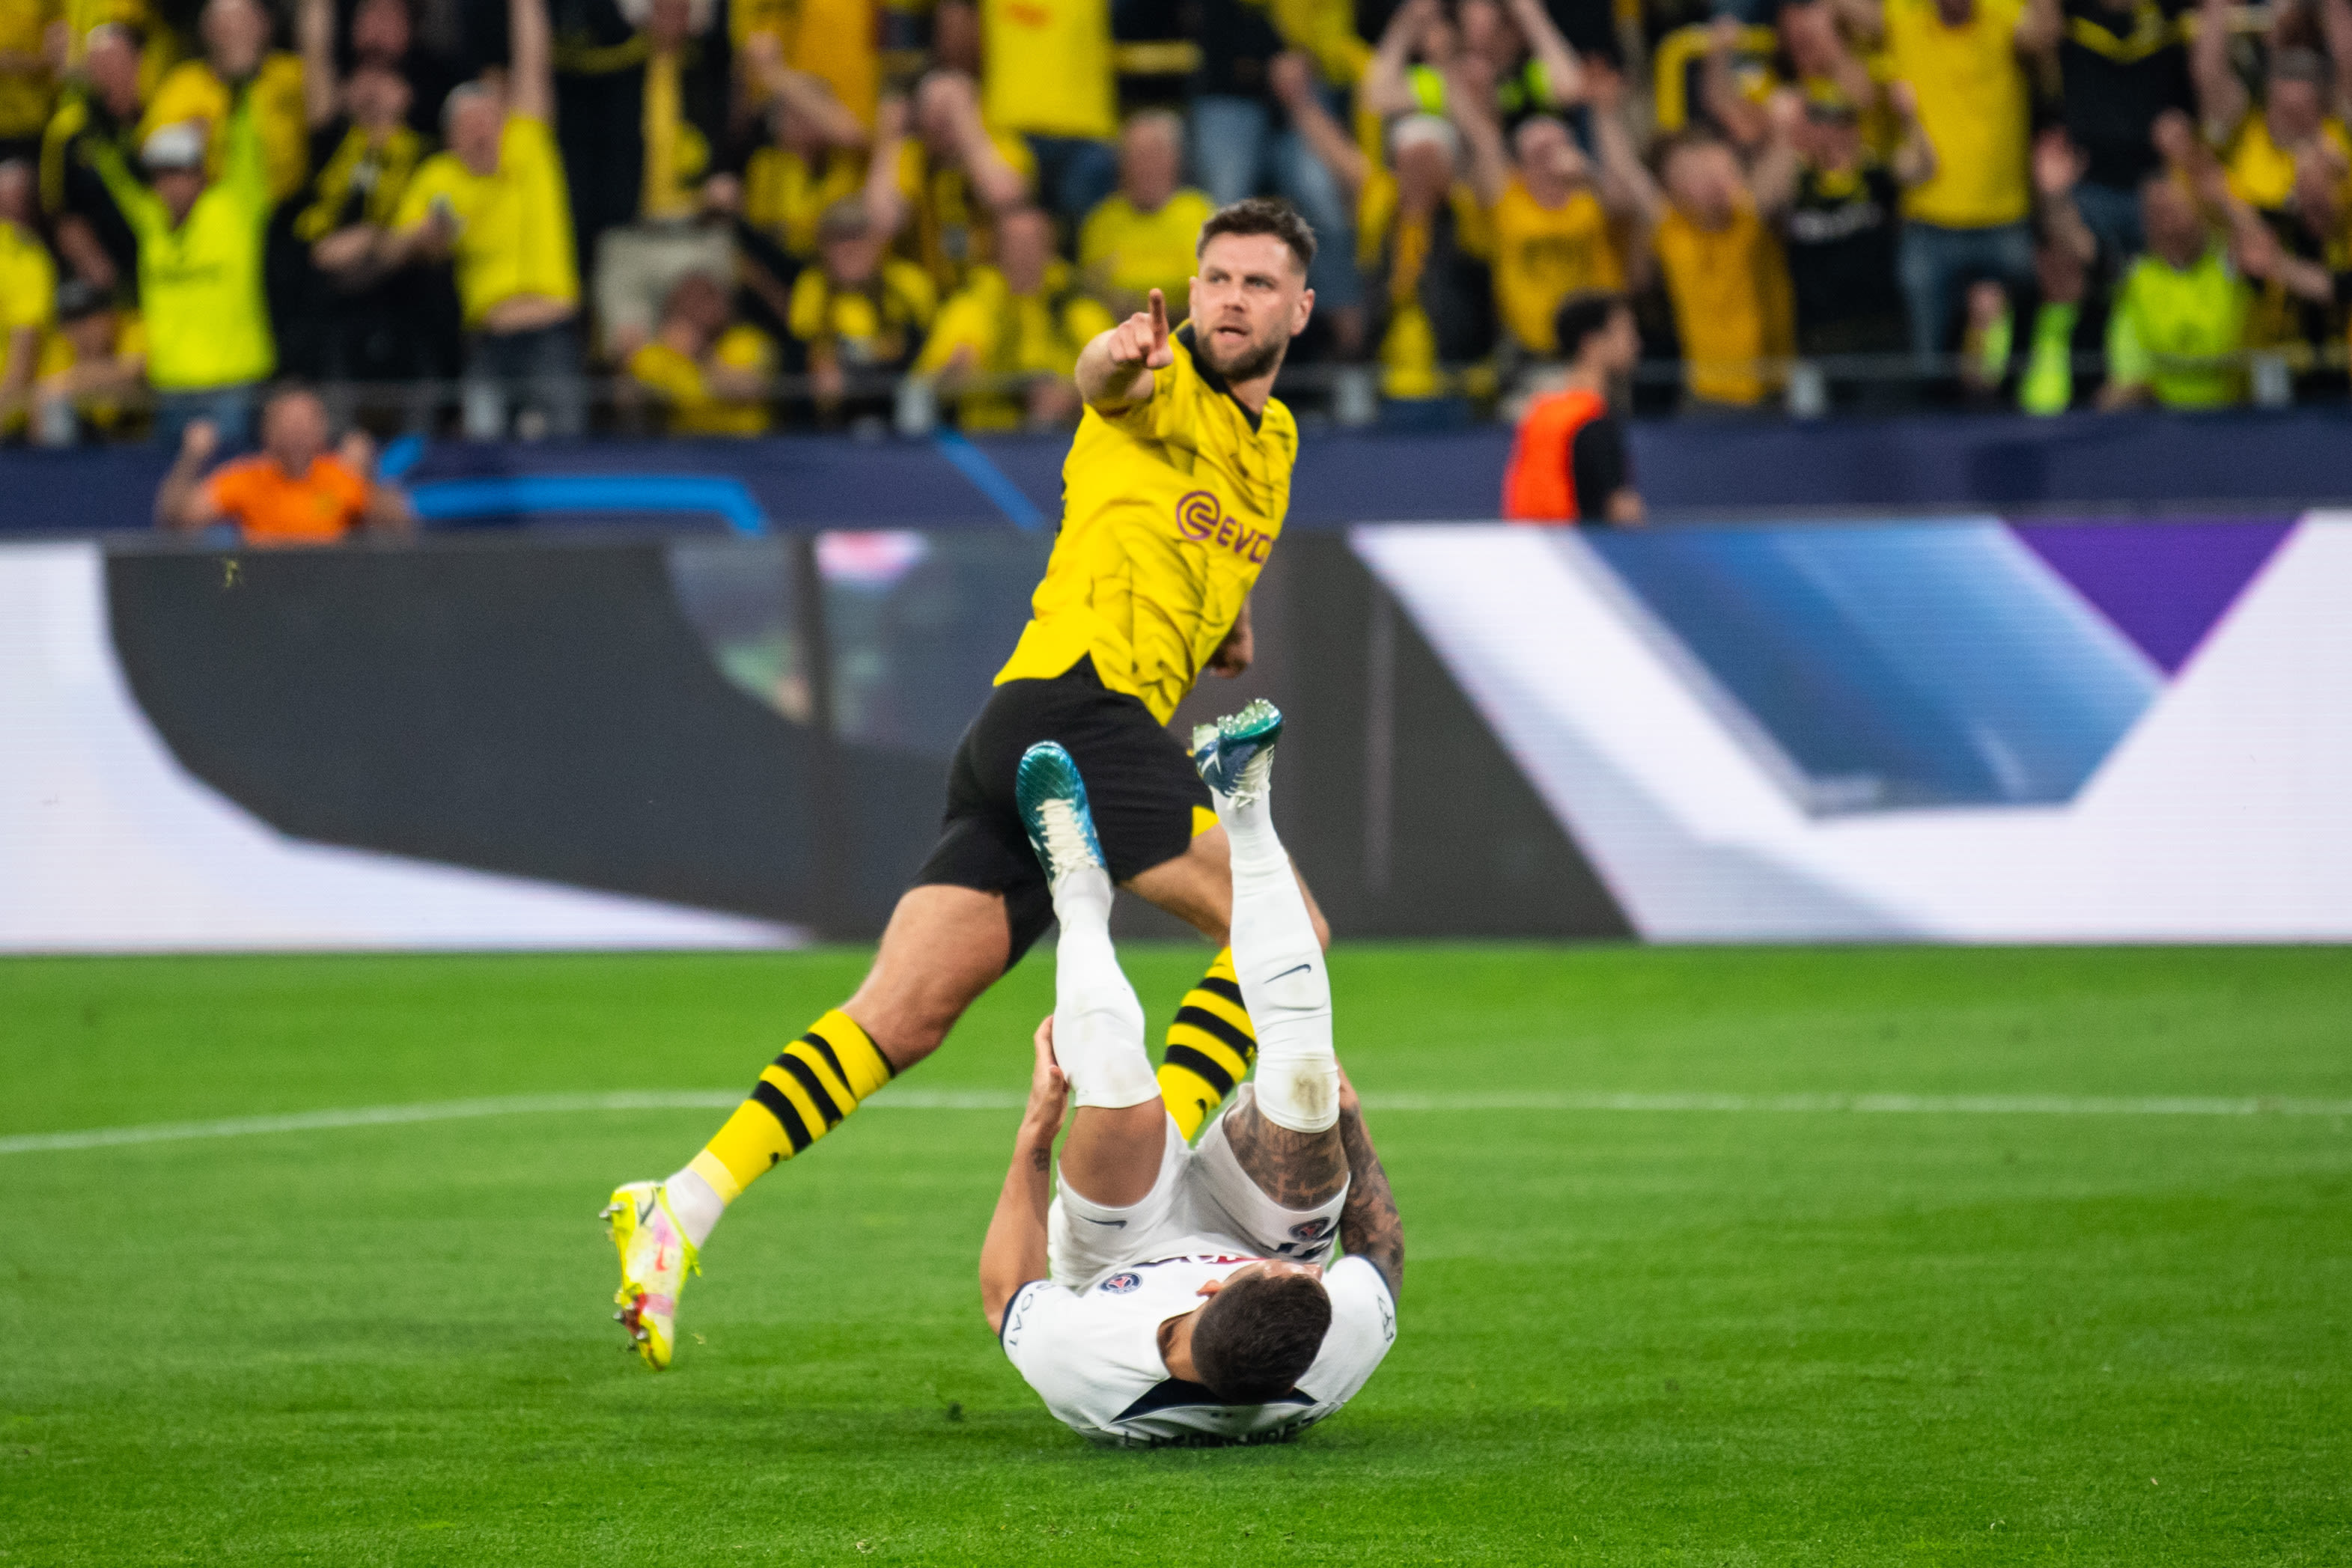 Champions League semifinals: Borussia Dortmund tops PSG in first leg, both teams rue missed chances